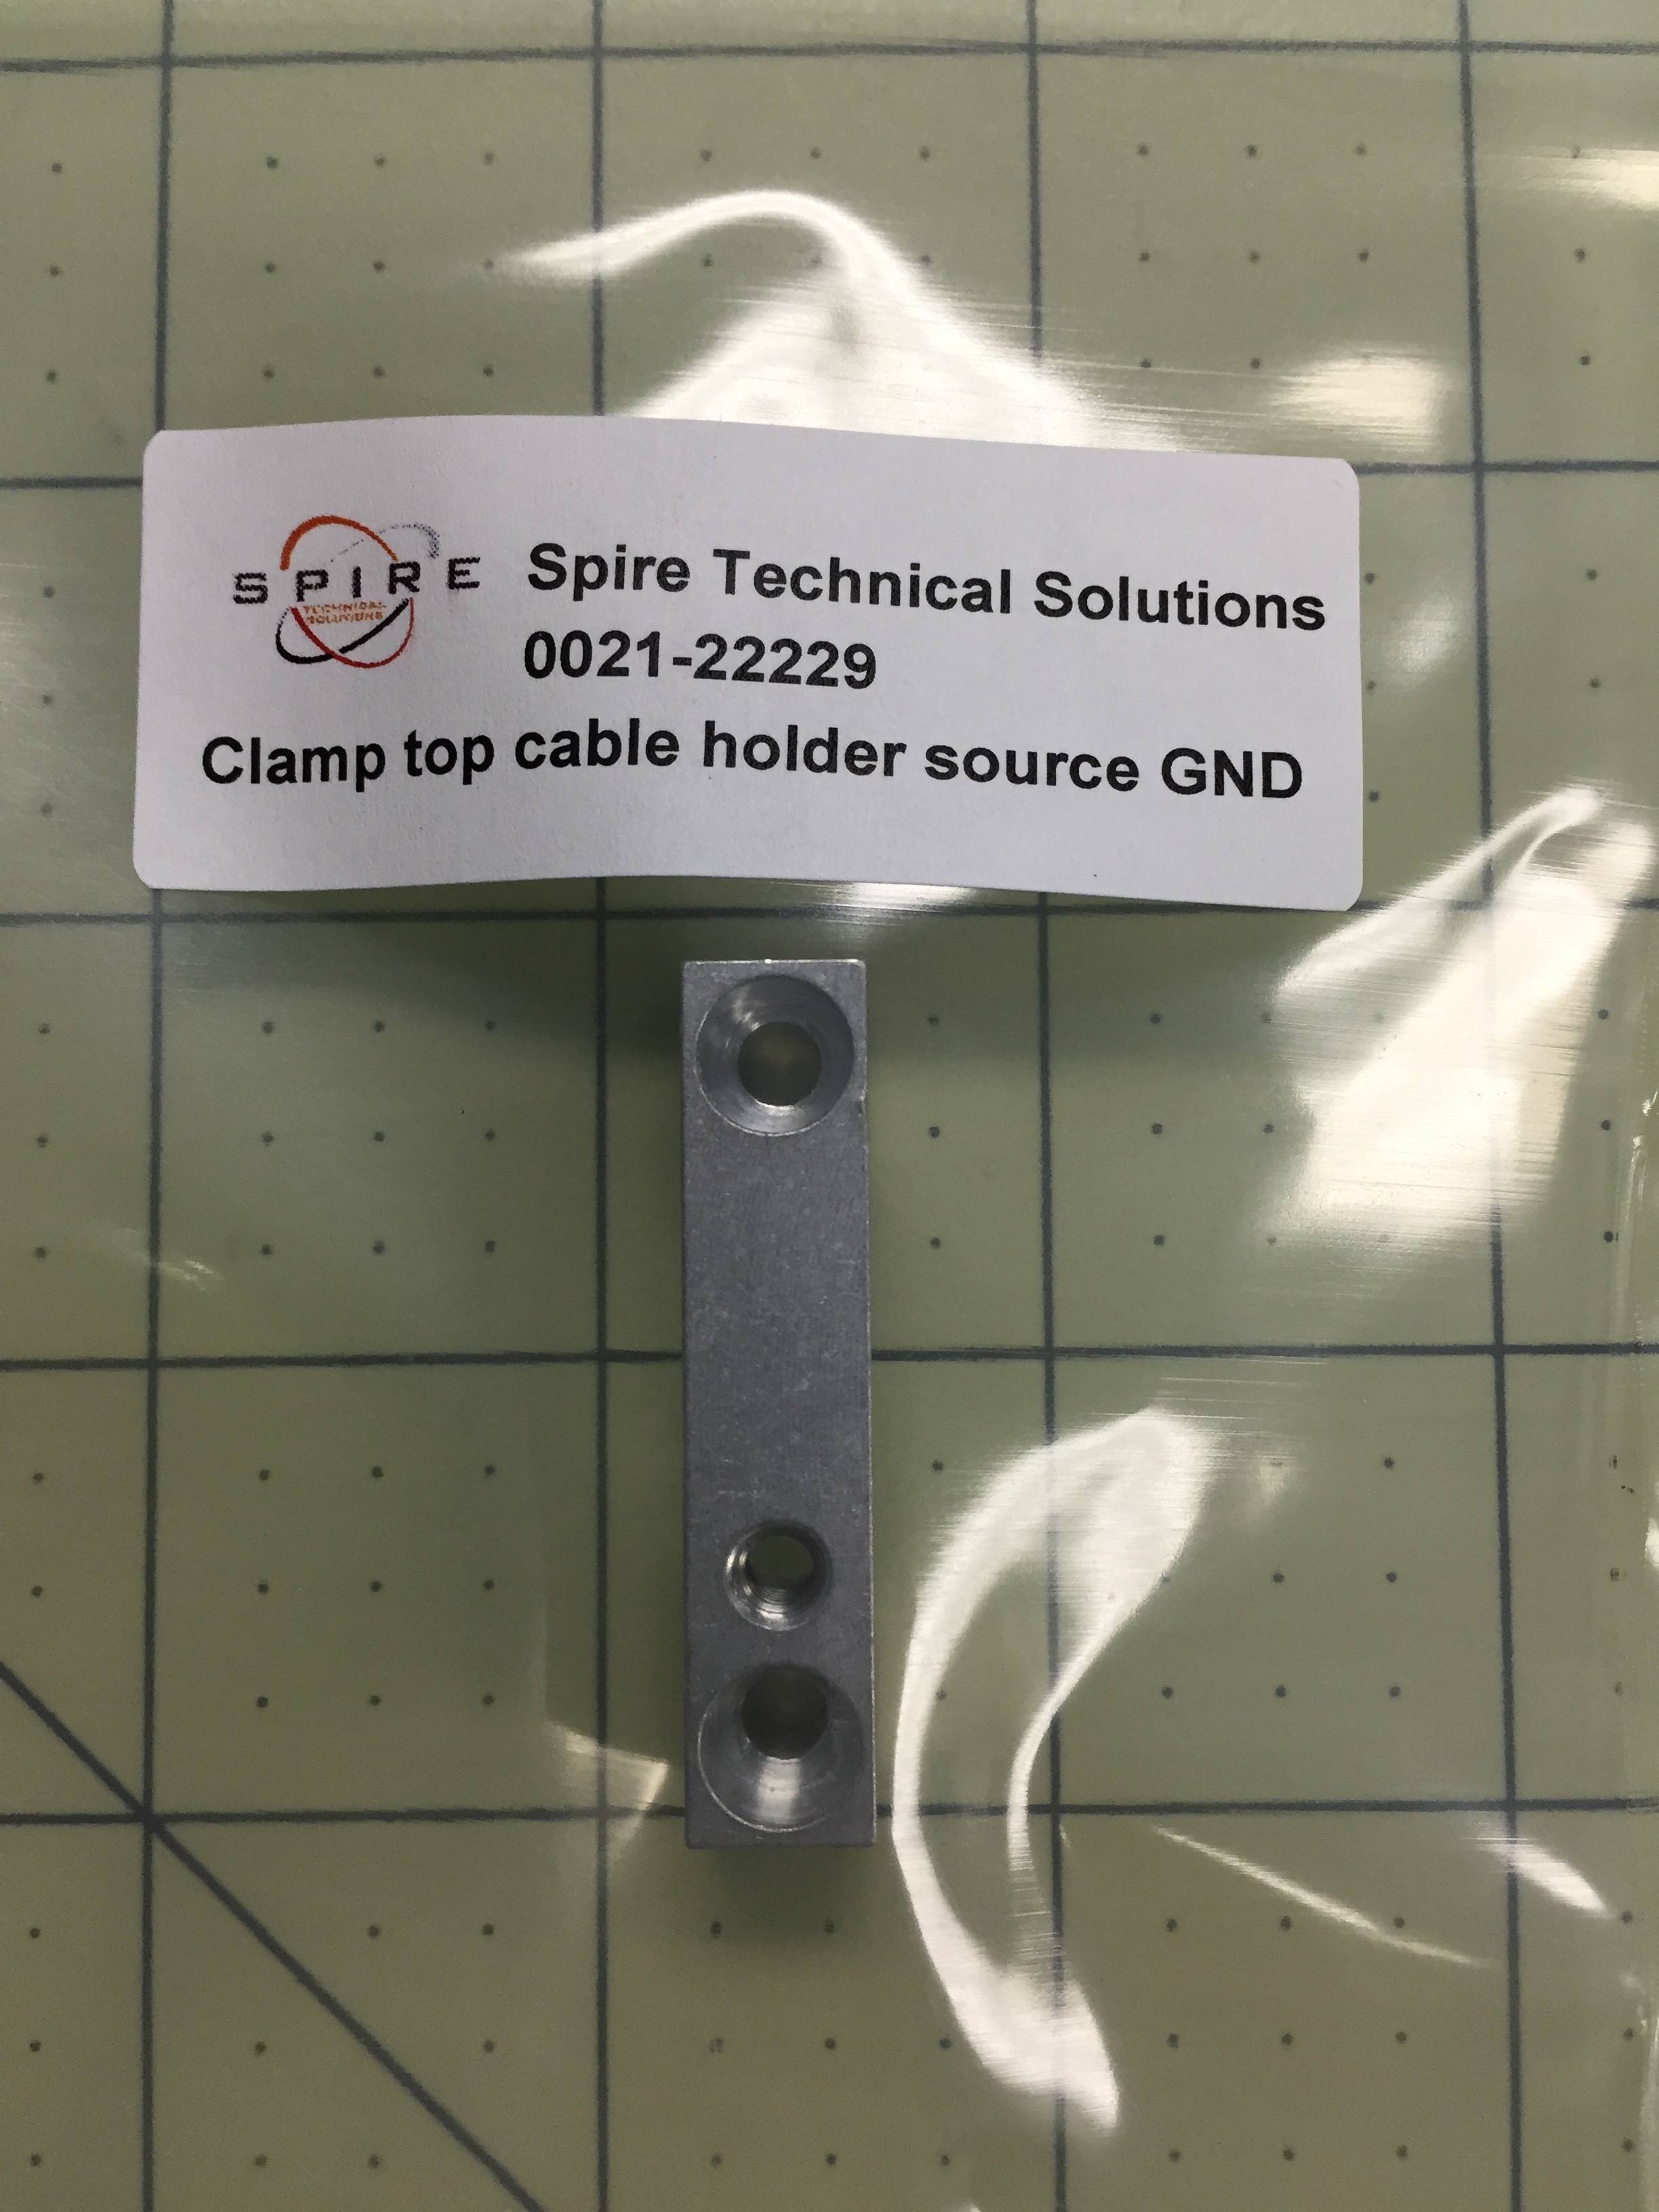 Clamp top cable holder source GND